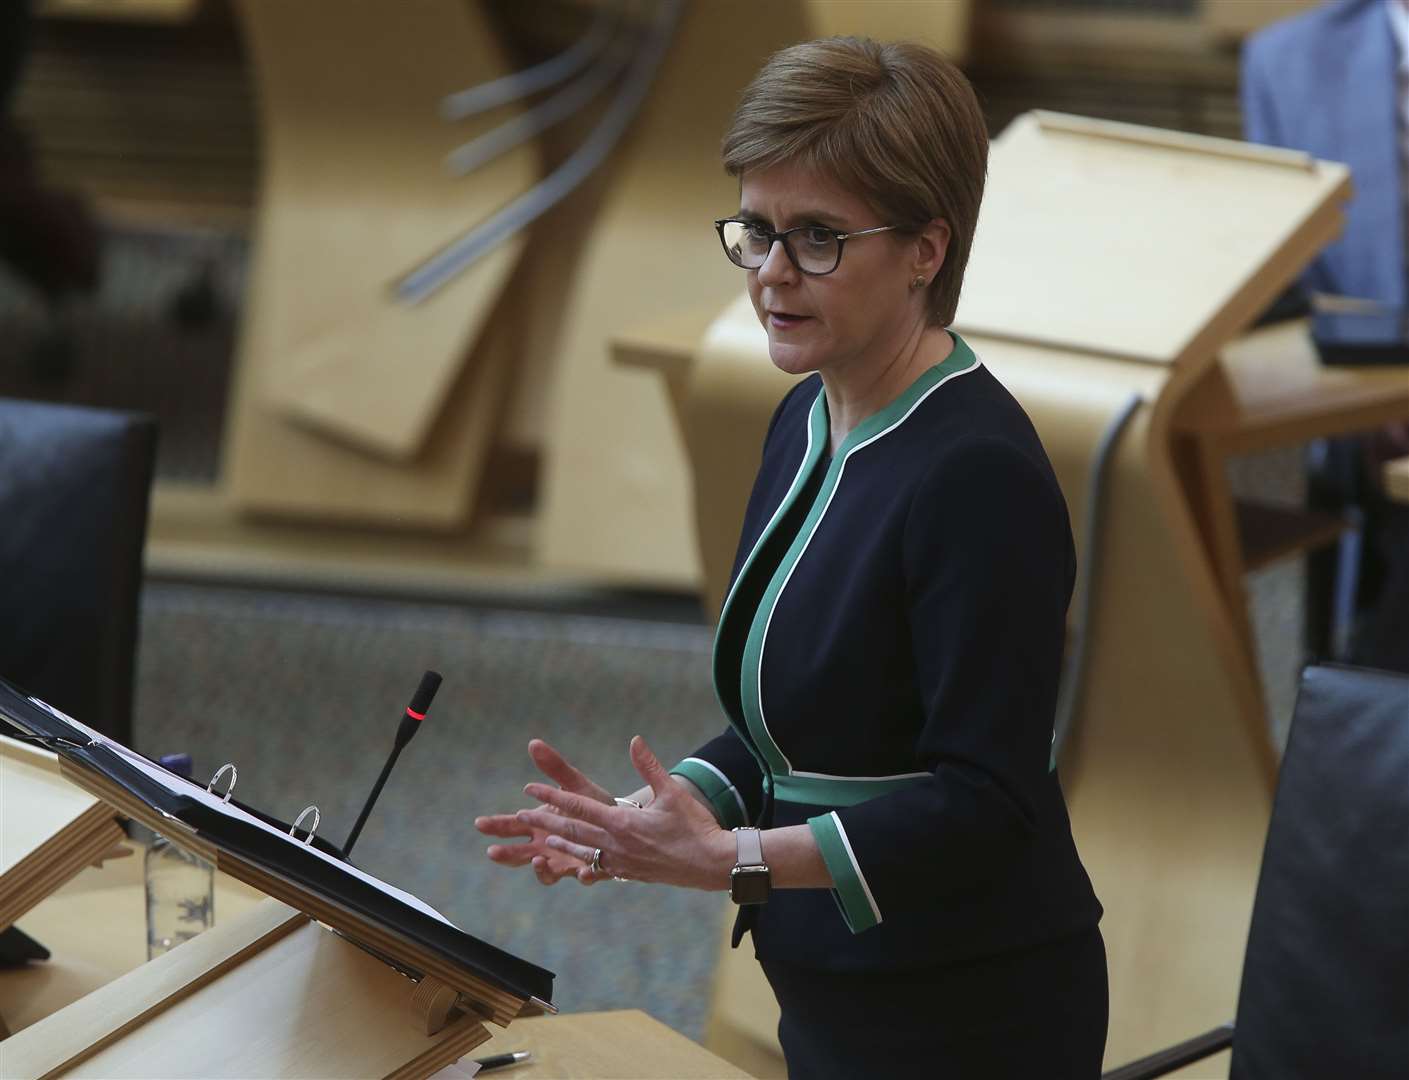 Nicola Sturgeon has pledged to be open and transparent with the Scottish public (Fraser Bremner/Daily Mail/PA)